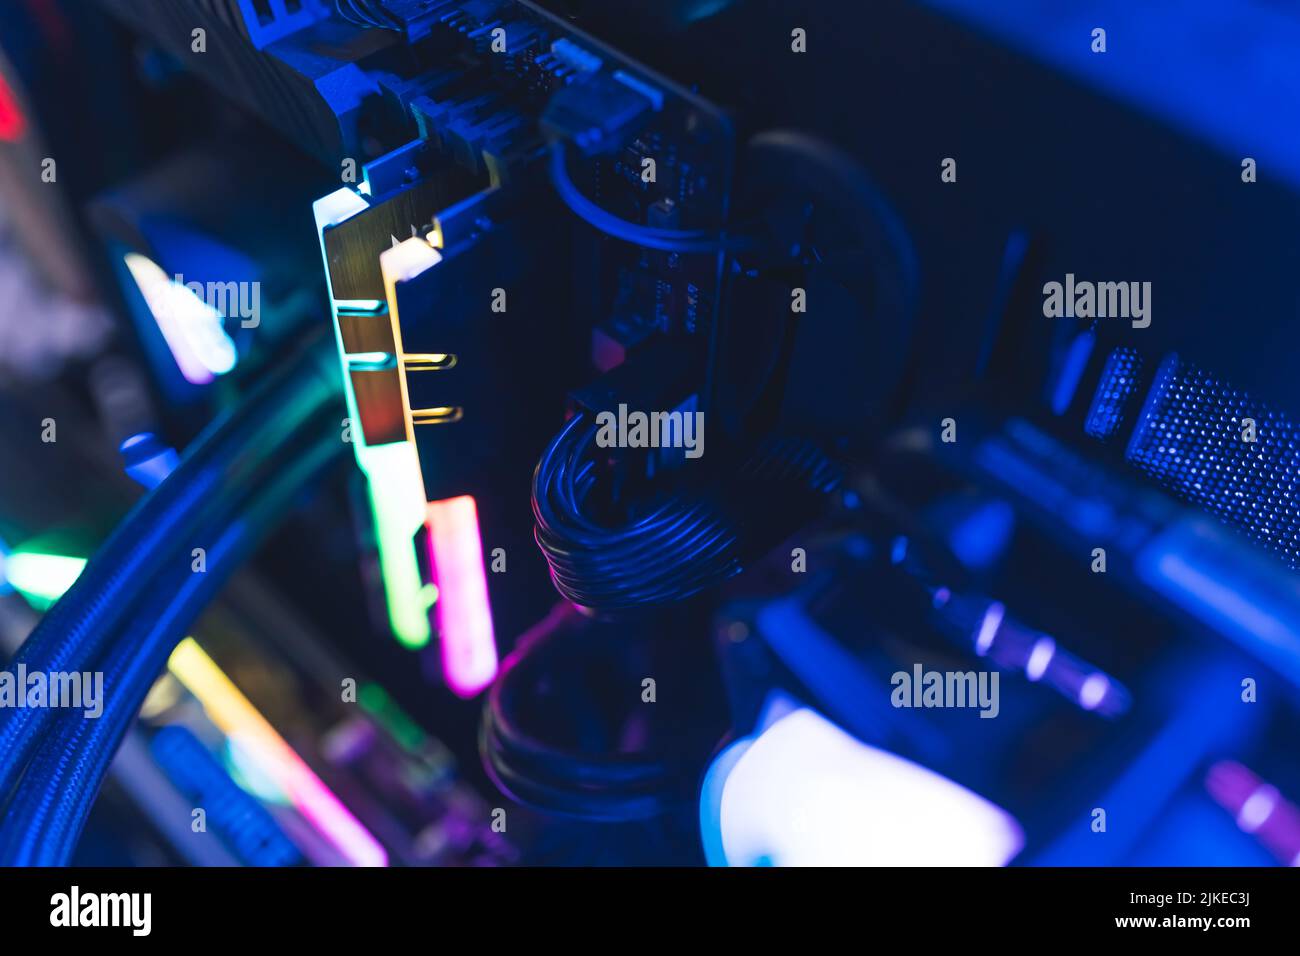 Professional gaming computer setup close-up. Glowing parts in rainbow colors and cables. Dark blue lighting. High quality photo Stock Photo